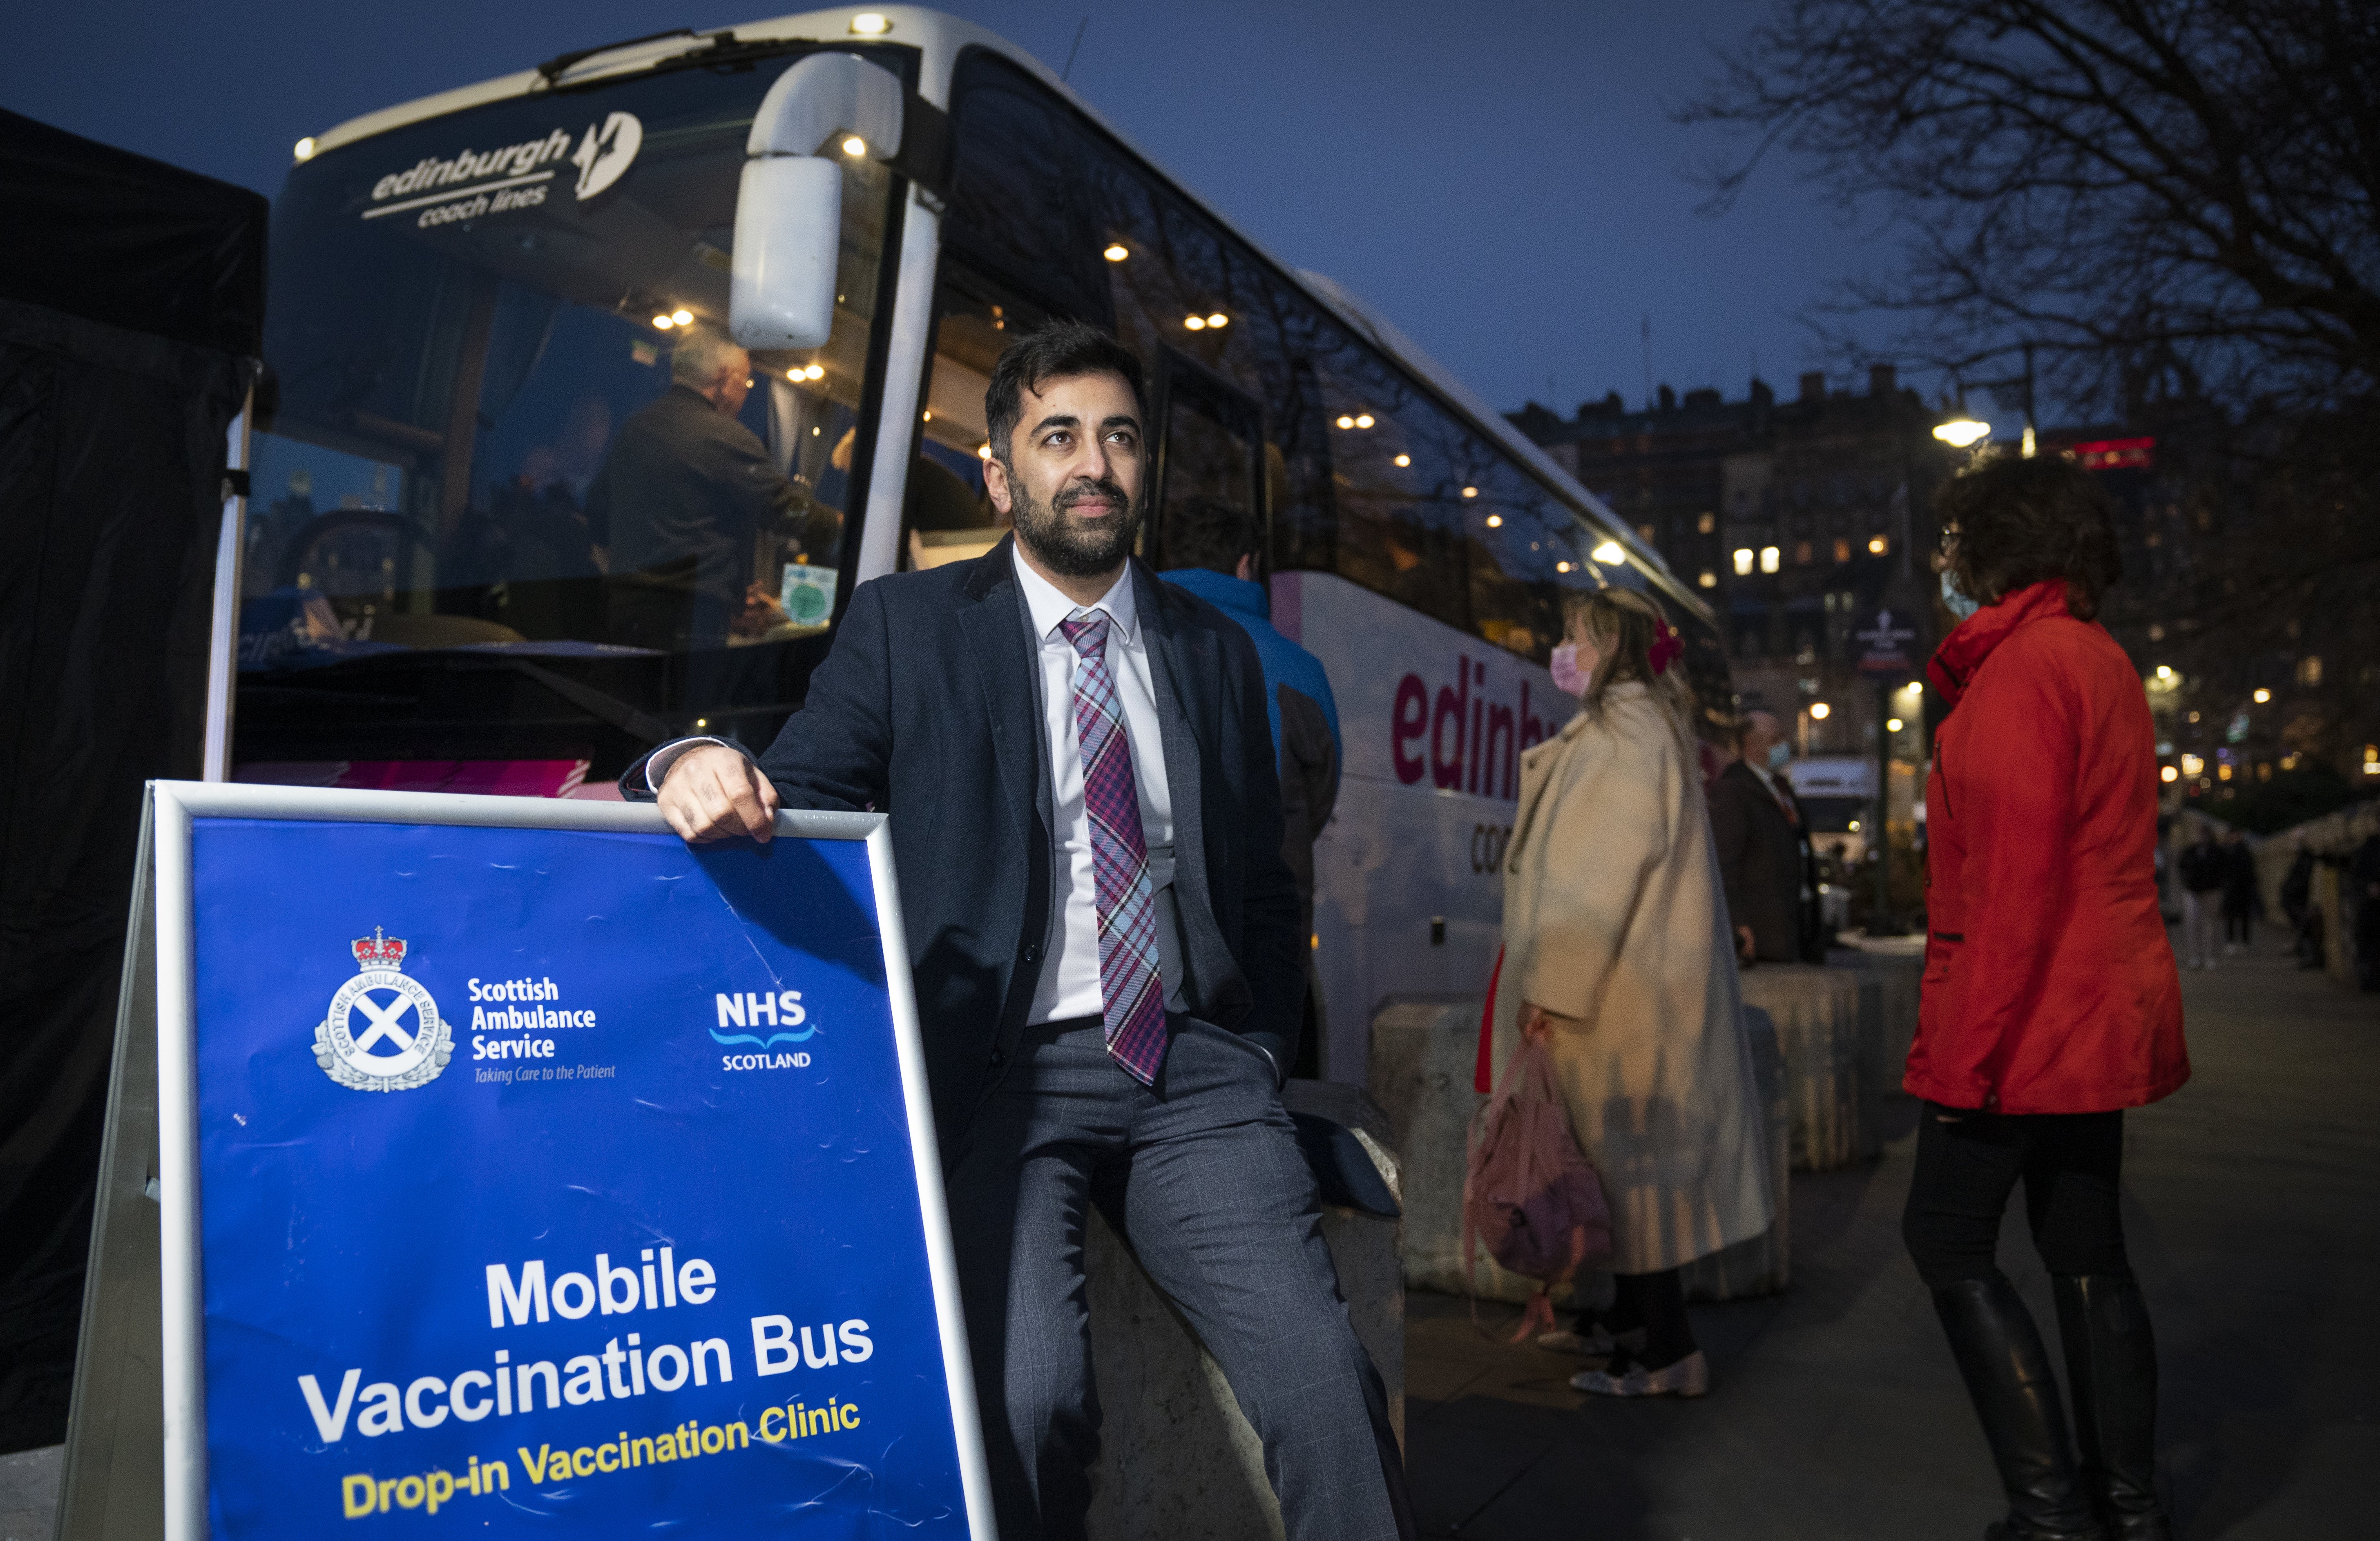 Health Secretary Humza Yousaf during a visit to the NHS Scotland mobile vaccination bus in Edinburgh